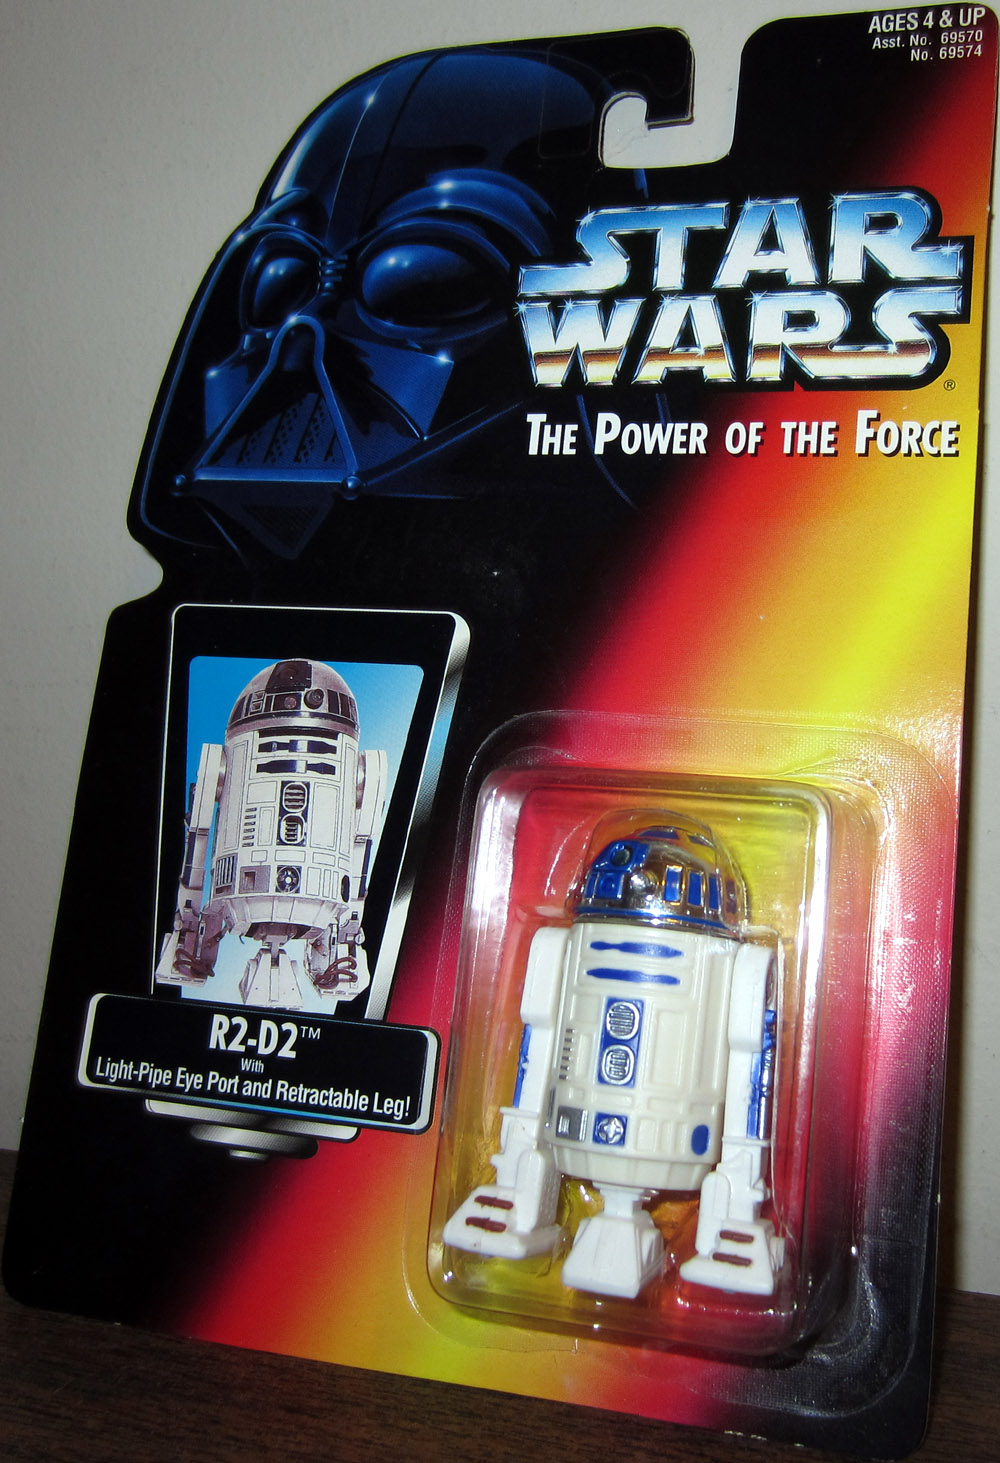 R2-D2 Action Figure for sale online Kenner Star Wars The Power of the Force 